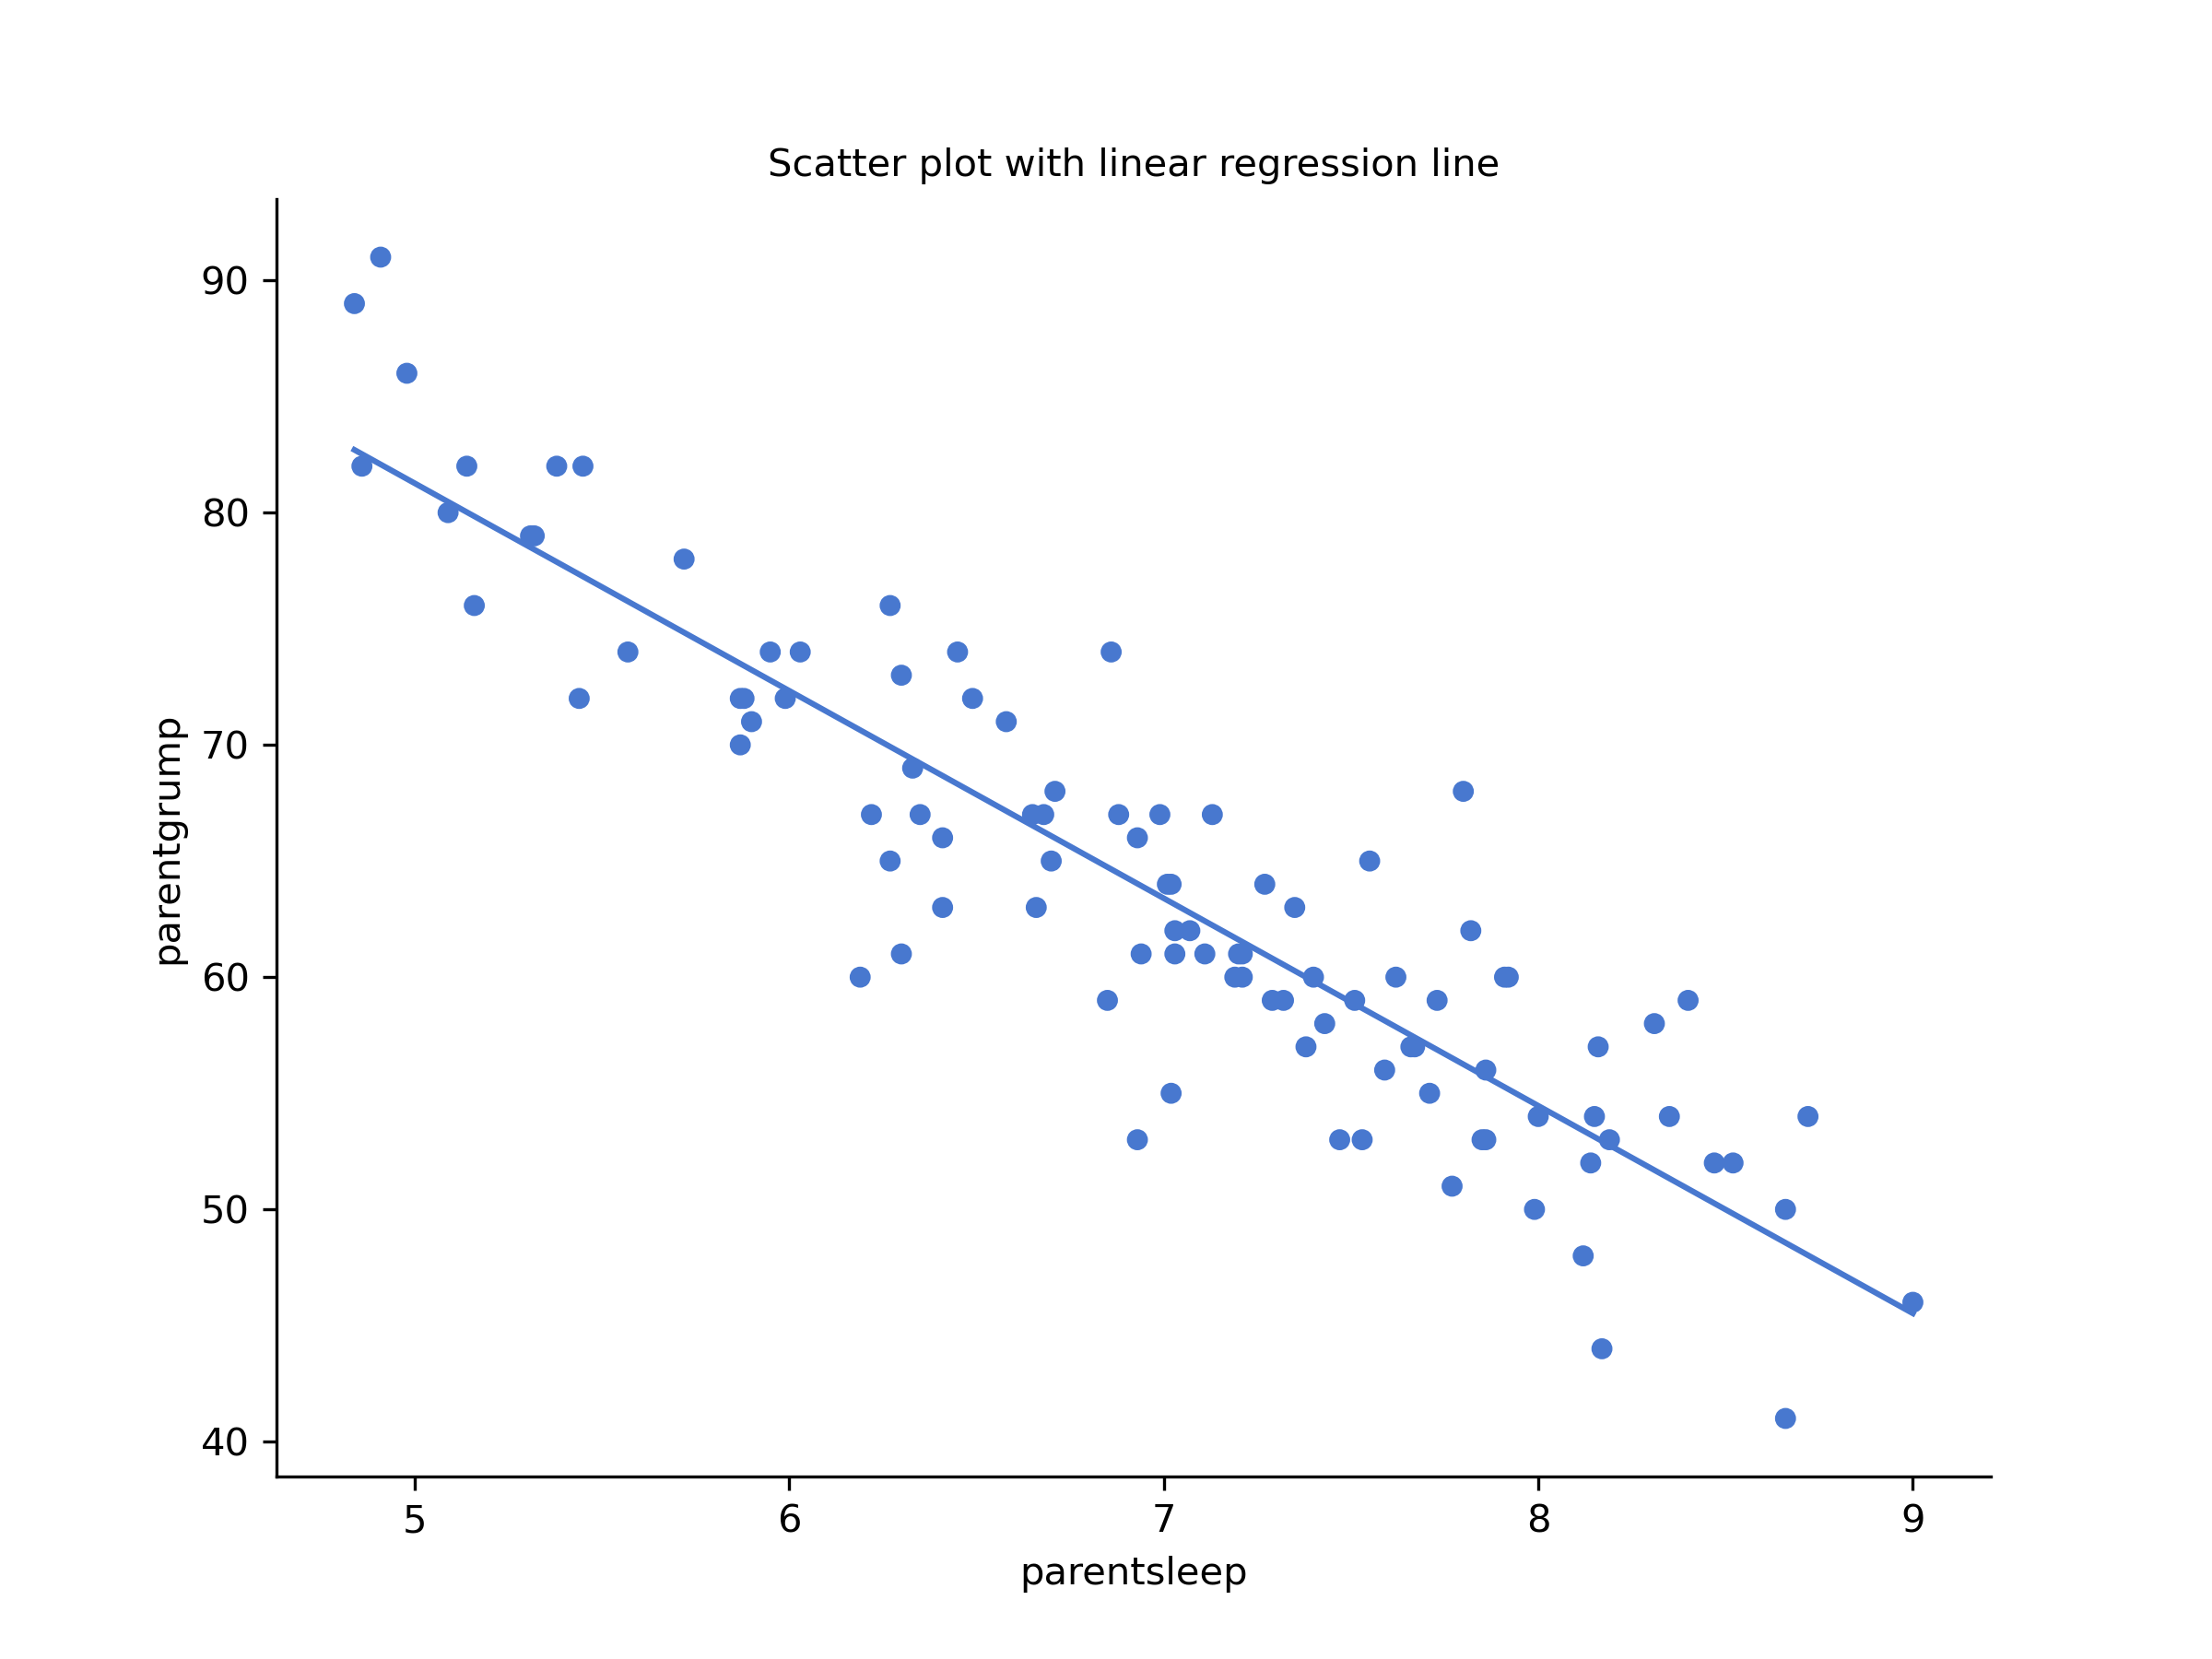 Scatterplots of parent sleep and grumpiness